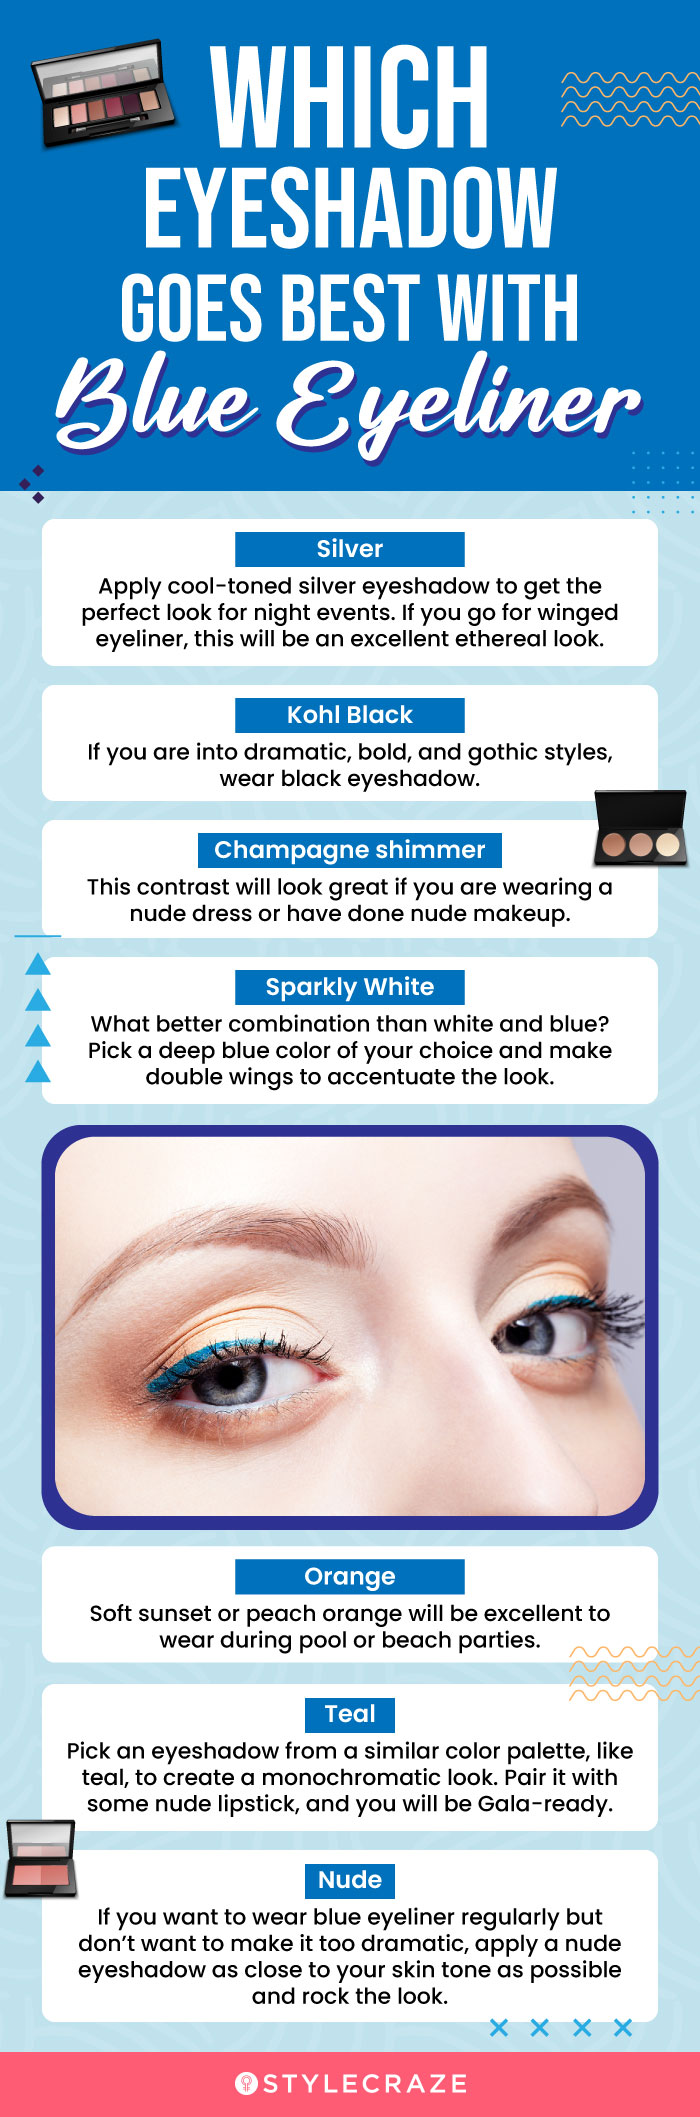 Which Eyeshadow Goes Best With Blue Eyeliner (infographic)